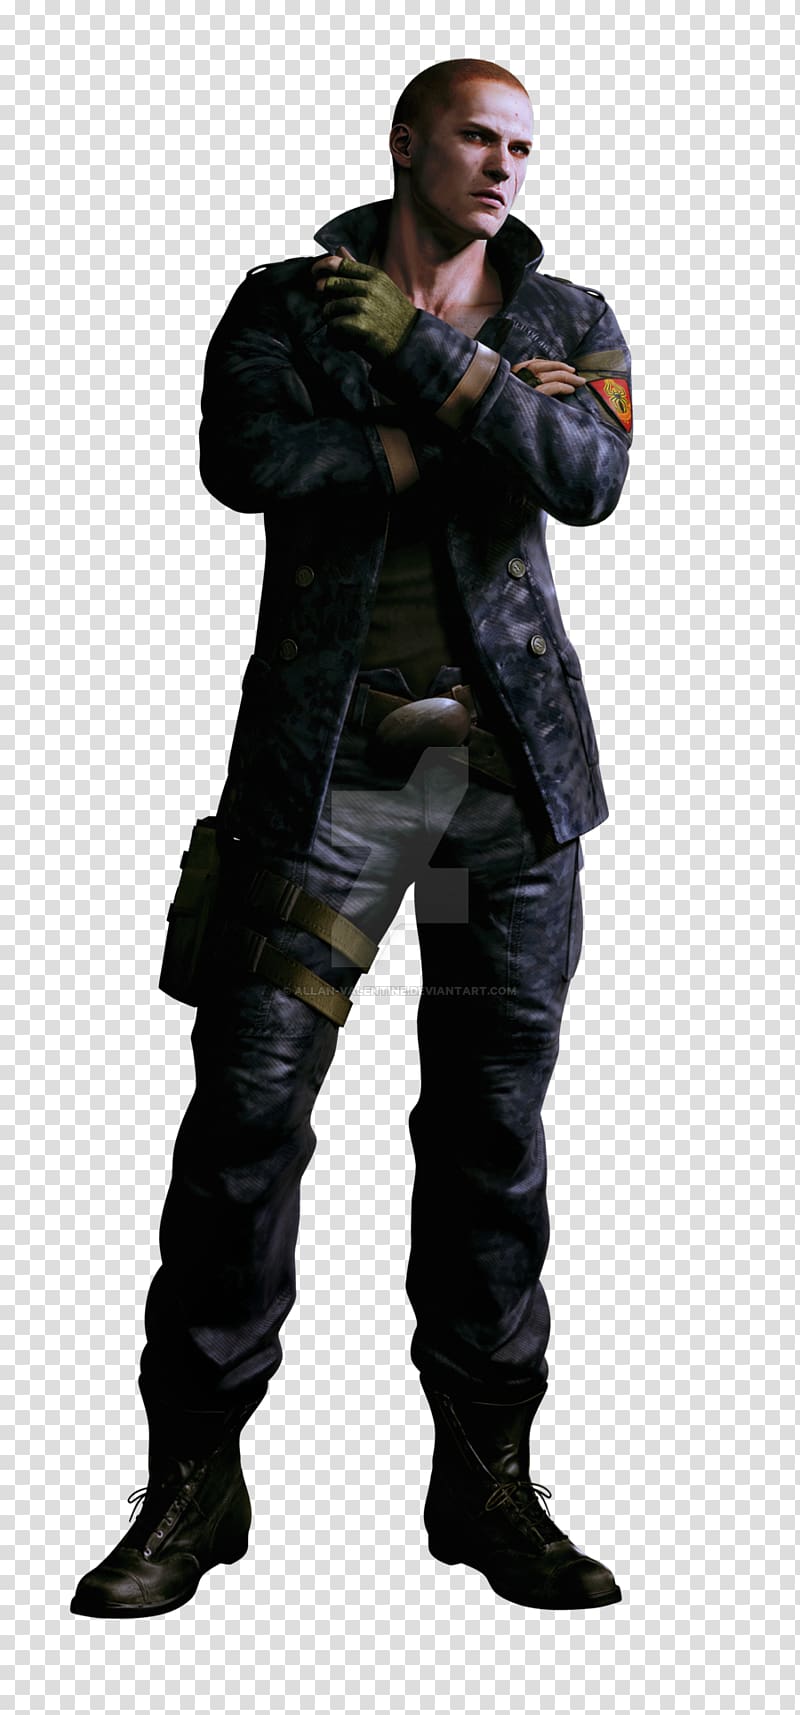 Resident Evil 6 Resident Evil 7: Biohazard Chris Redfield Ada Wong Leon S. Kennedy, others transparent background PNG clipart